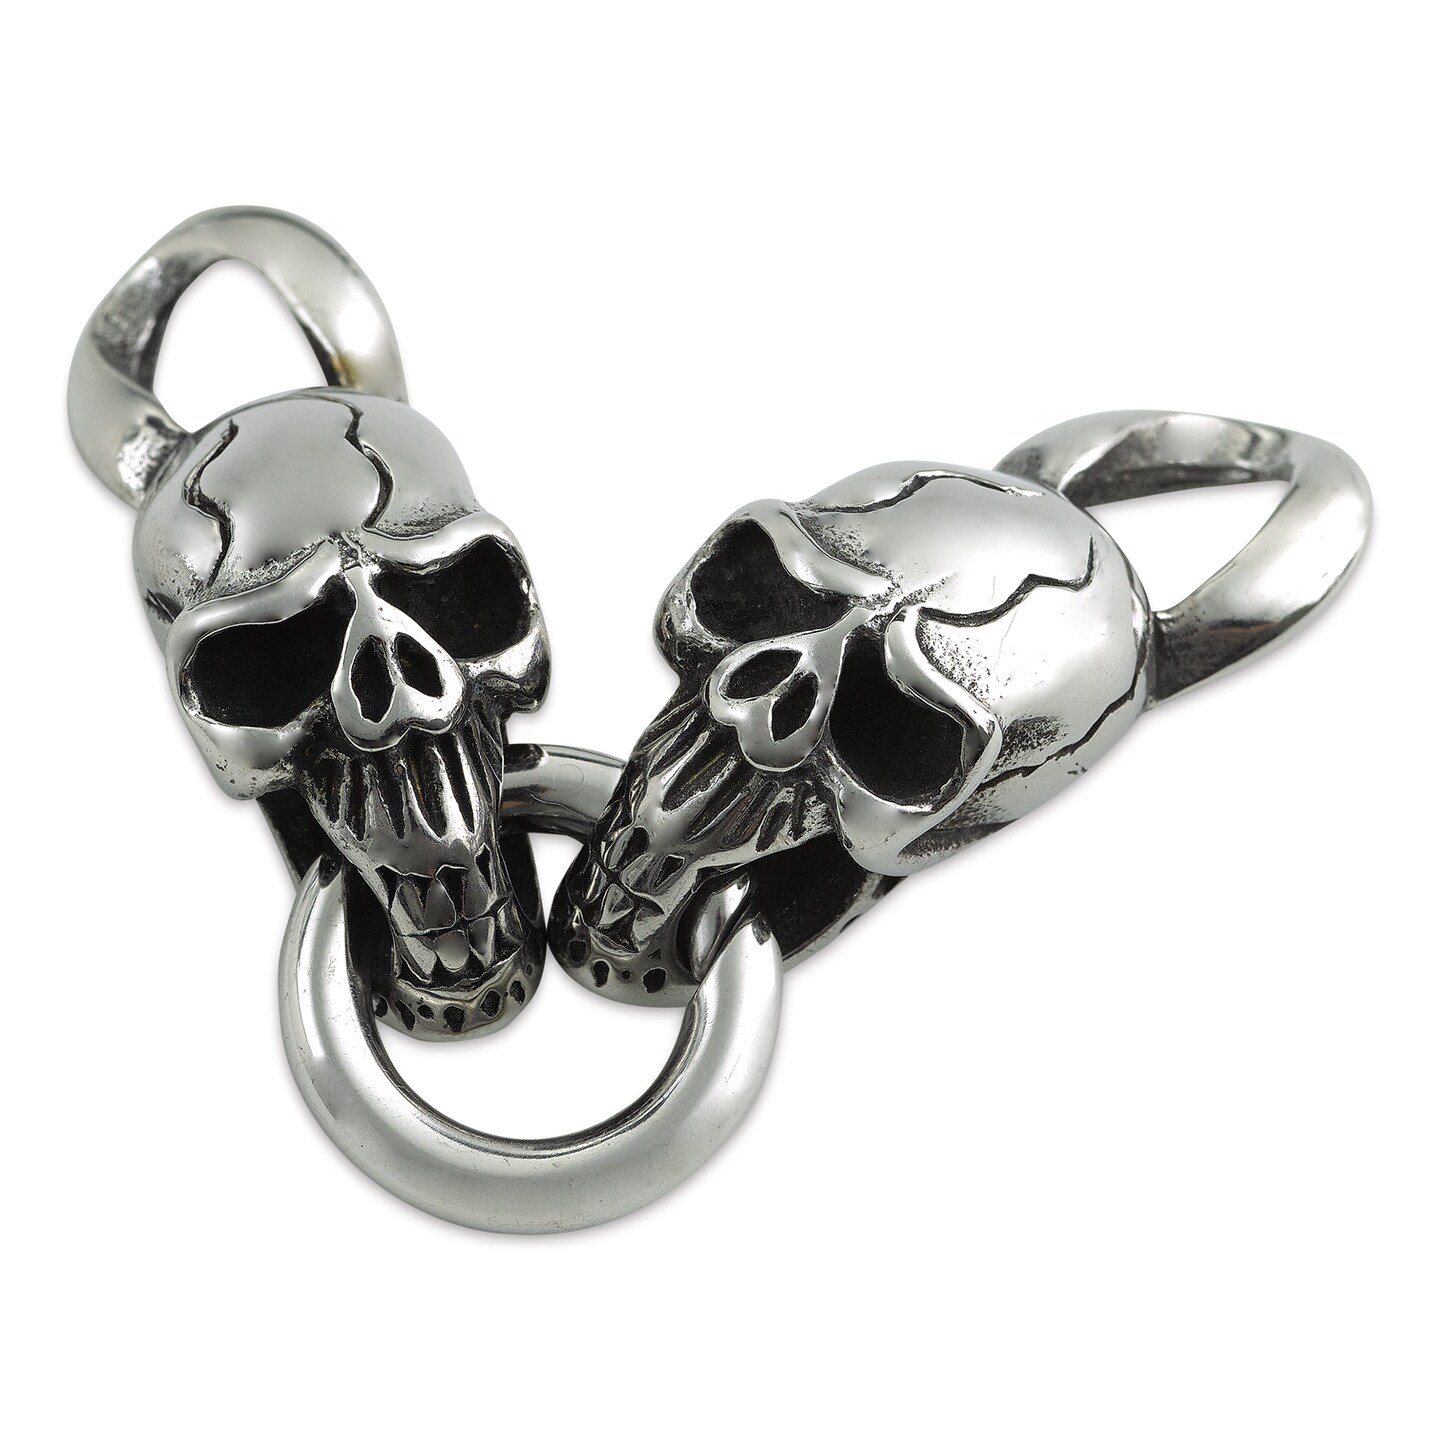 John Bead Stainless Steel Antique Silver Clasp - Skull, 35 x 14 mm